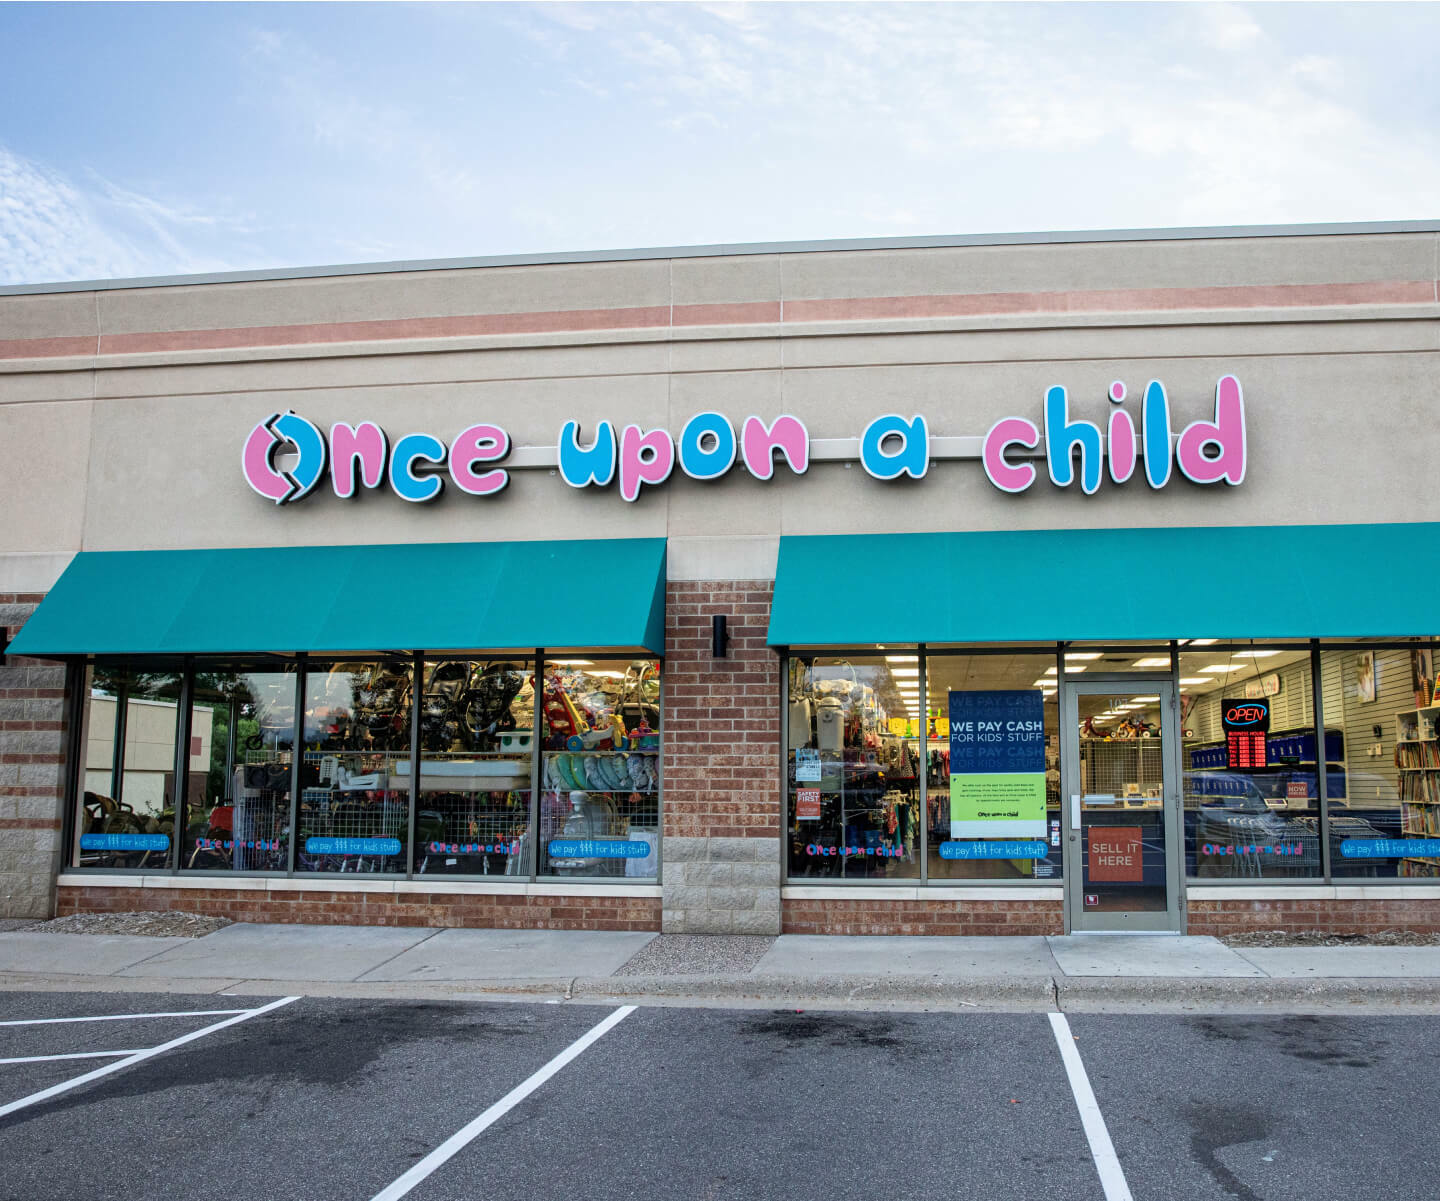 A store front with a big sign board on top that says "once upon child"